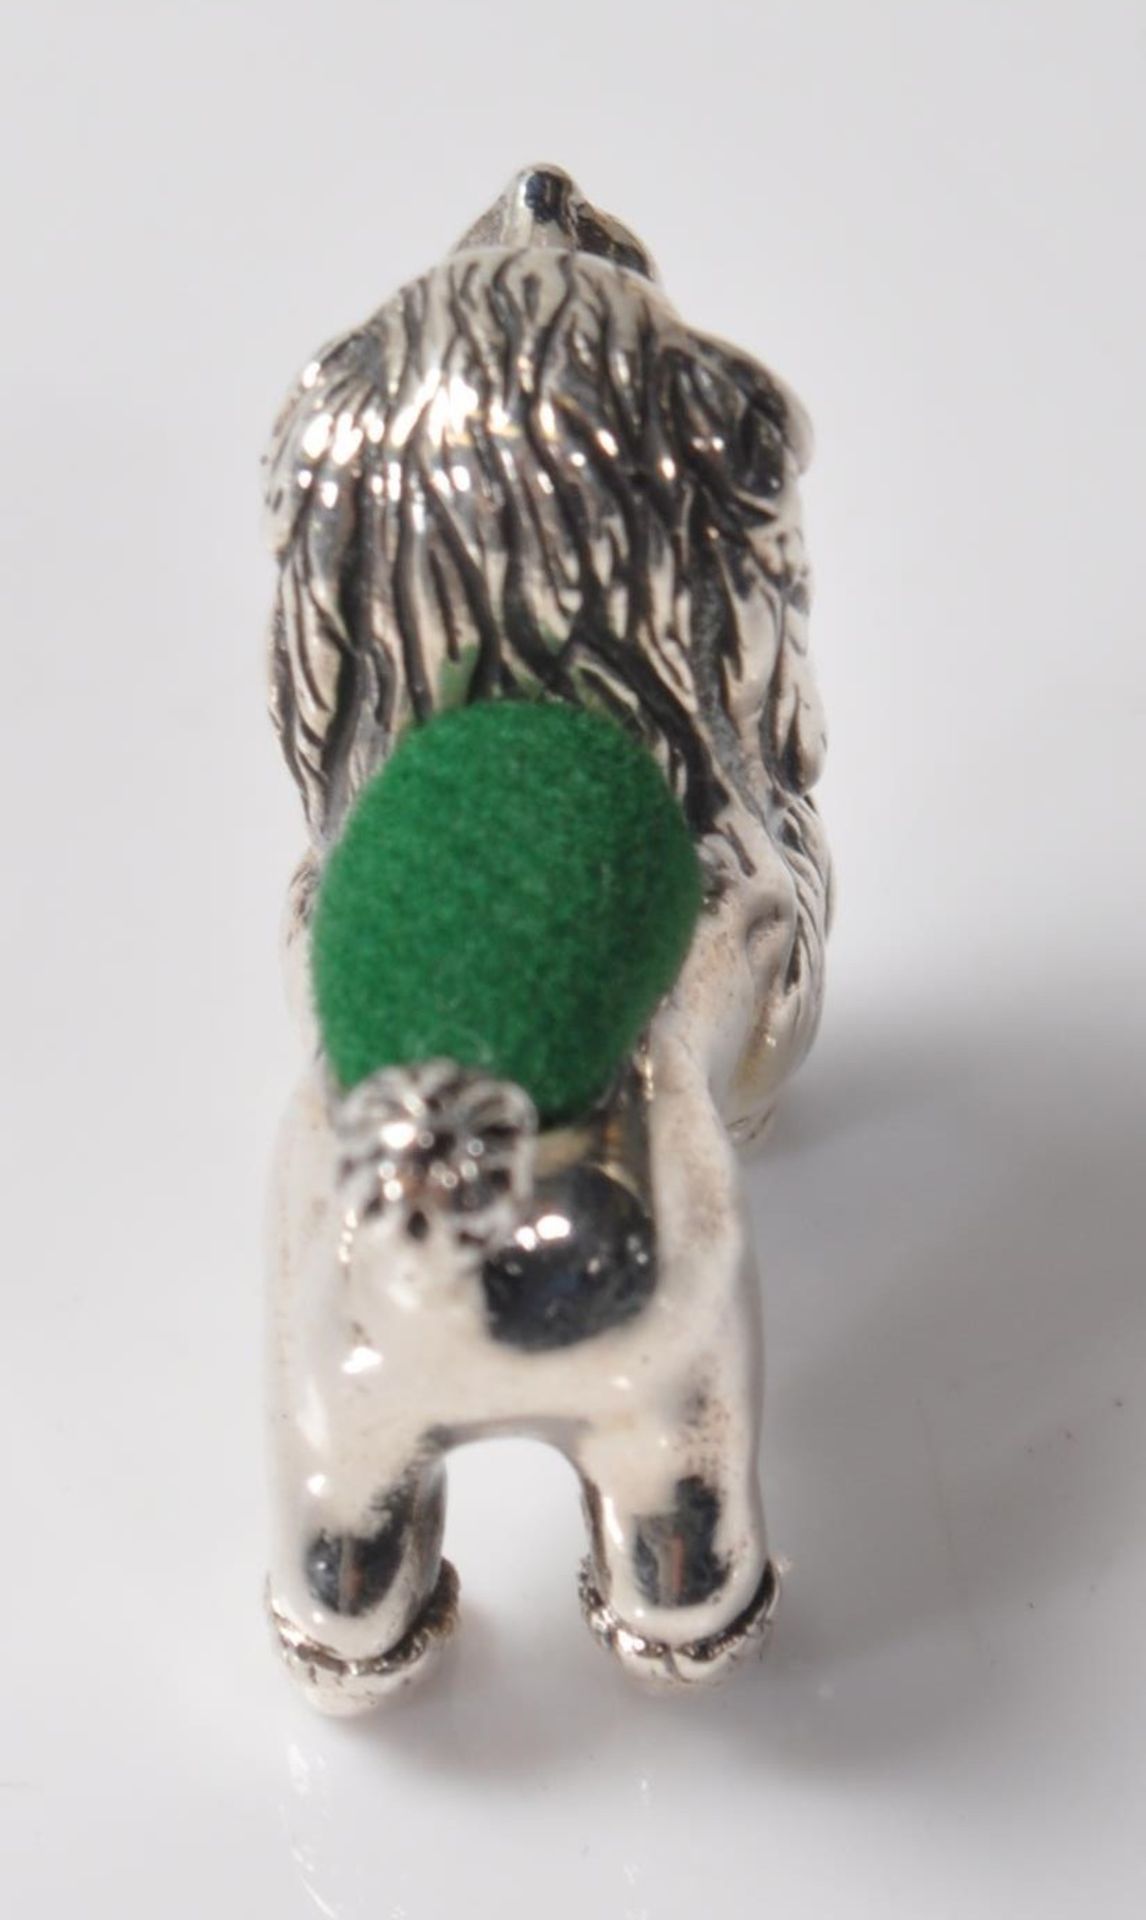 STAMPED 925 SILVER PIN CUSHION IN THE FORM OF A POODLE. - Image 3 of 5